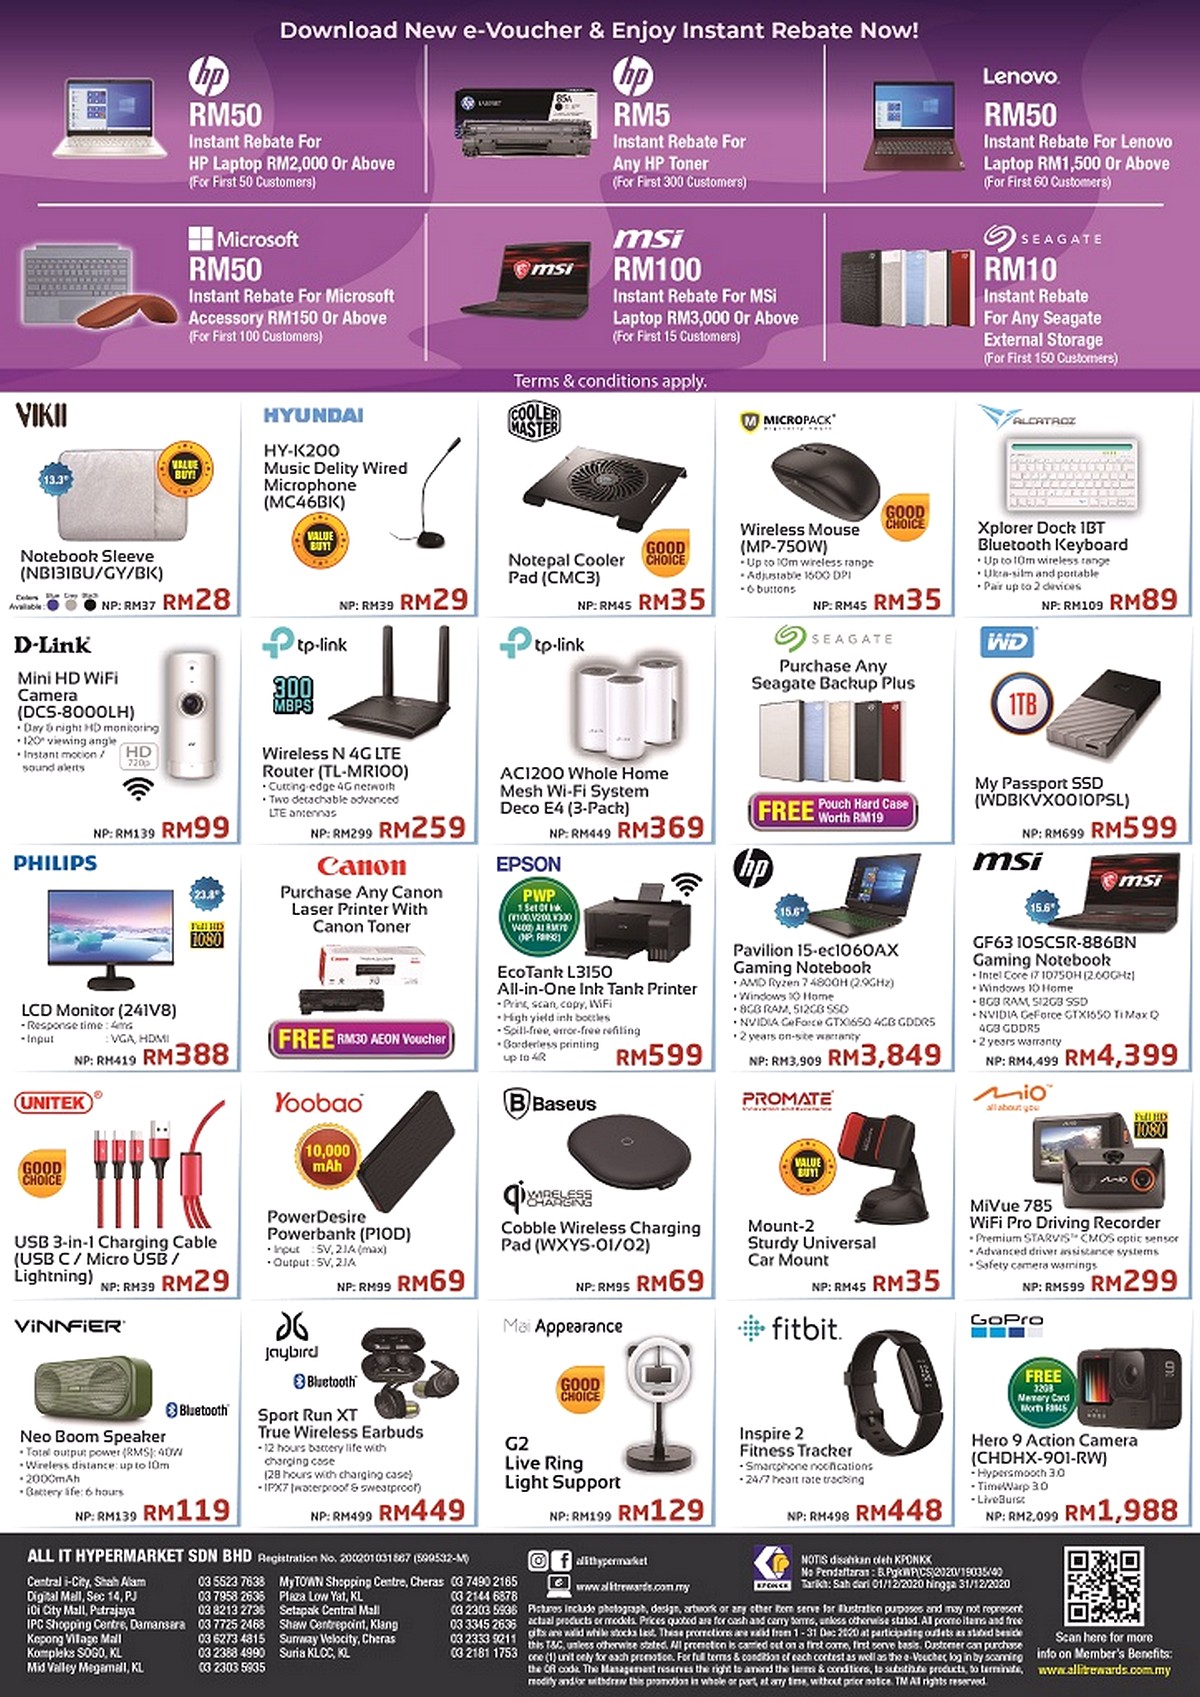 TQversary-sale_Backside1-01-1 - Audio System & Visual System Cameras Computer Accessories Electronics & Computers Home Appliances IT Gadgets Accessories Kuala Lumpur Laptop Mobile Phone Putrajaya Selangor Tablets Warehouse Sale & Clearance in Malaysia 